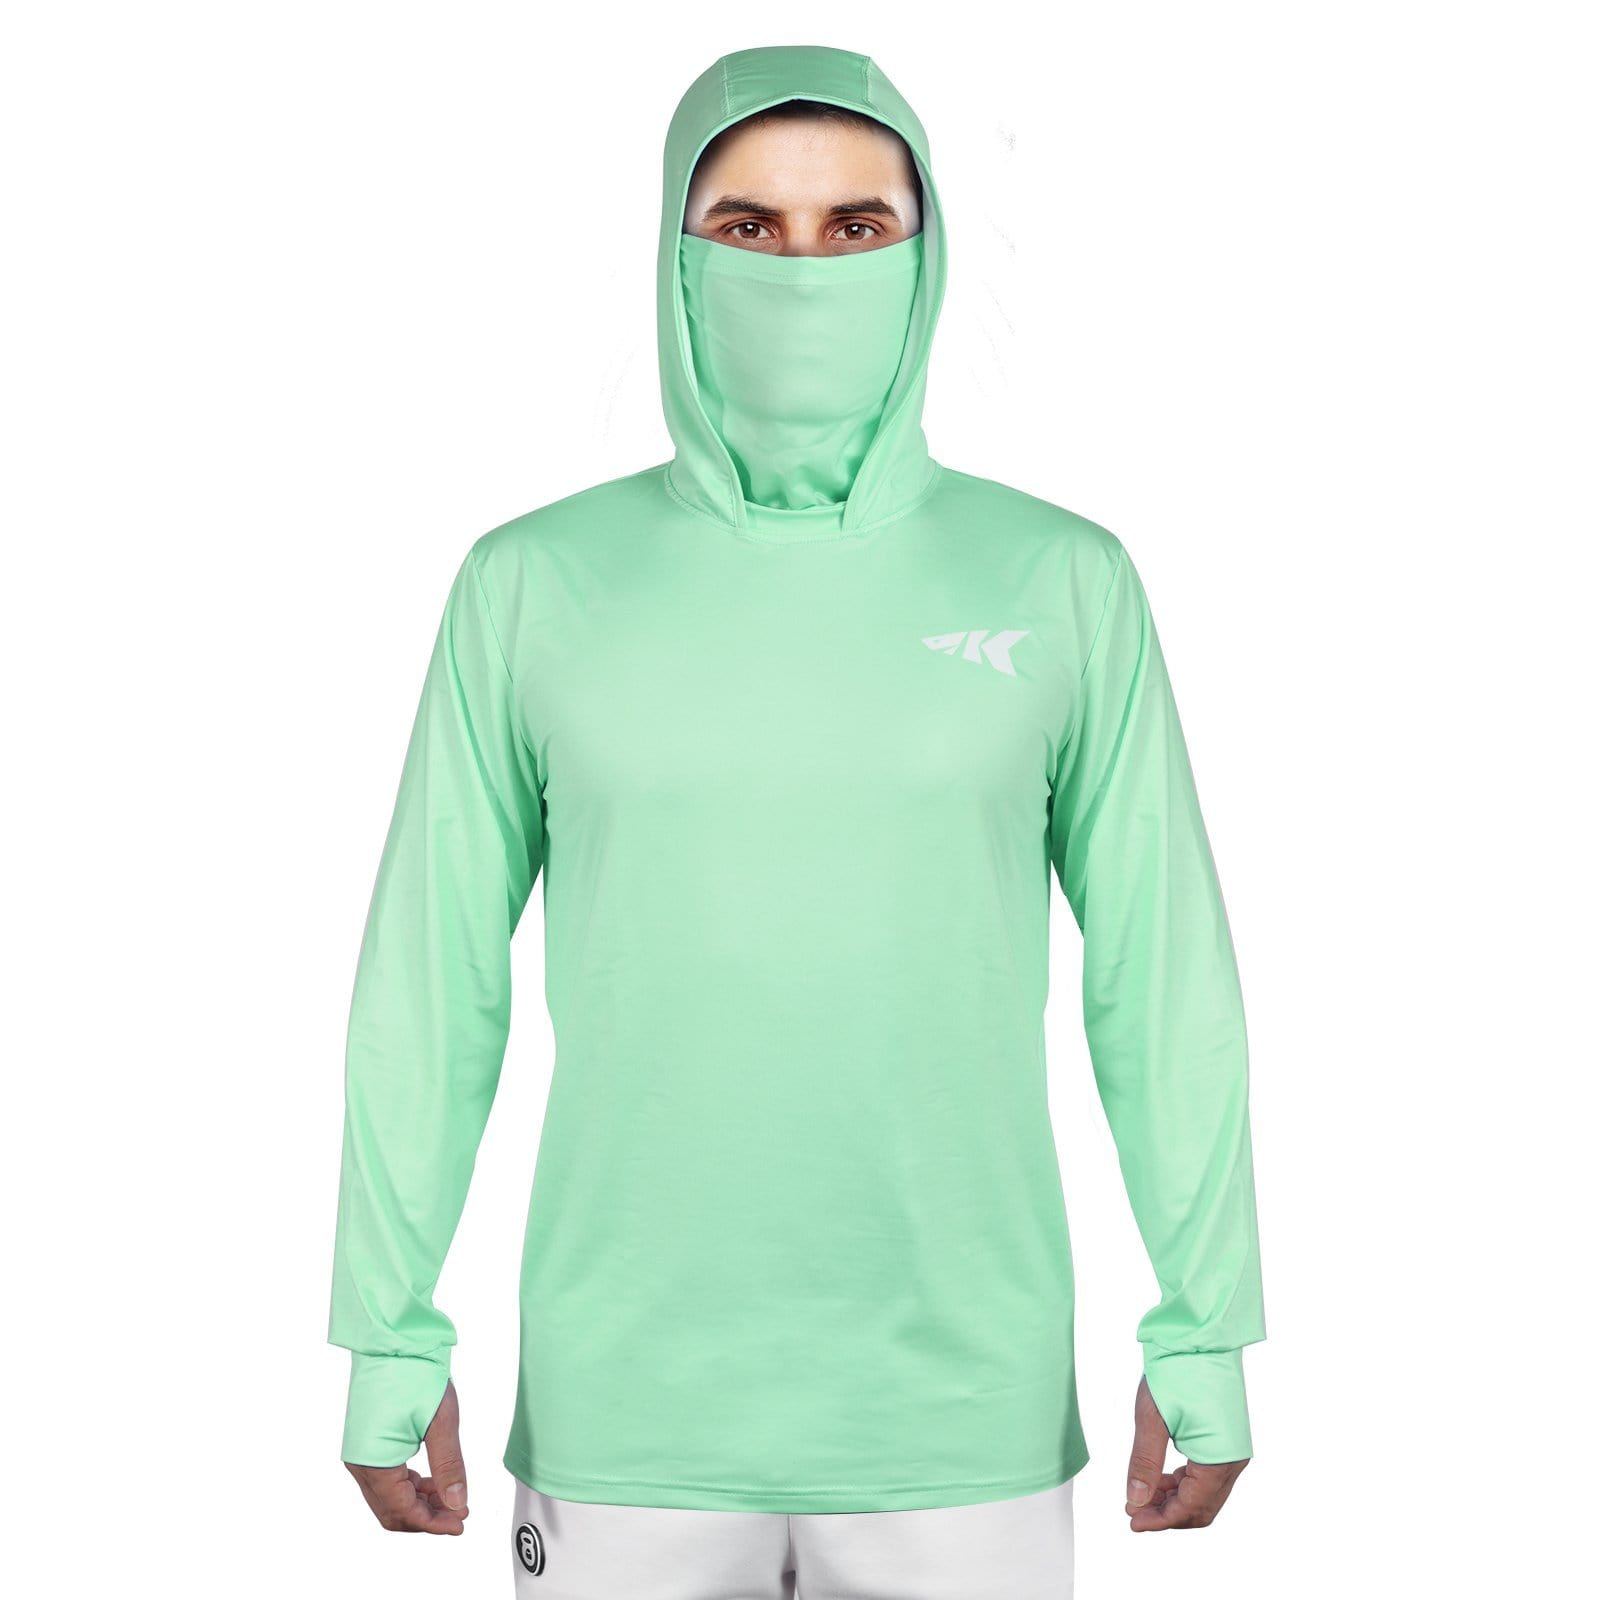 Hooded Fishing Shirt vs. Traditional Shirt: Which is Right for You?